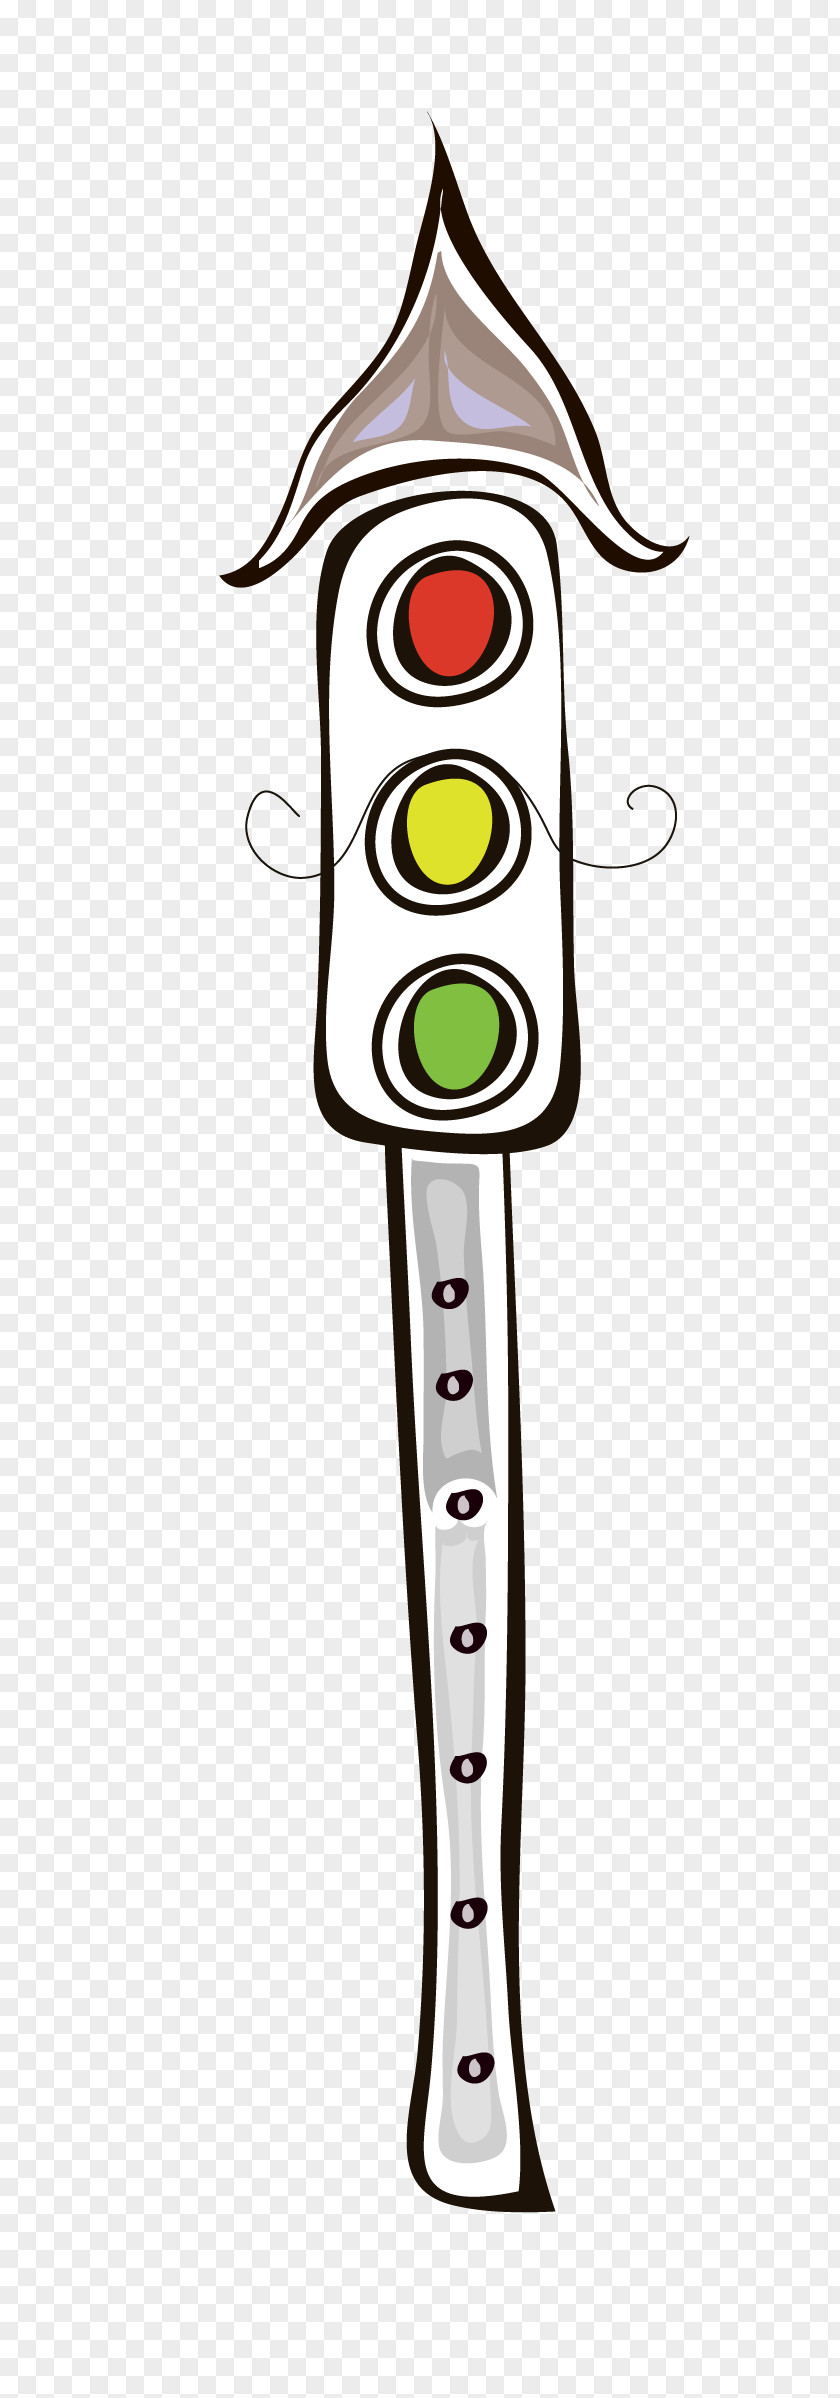 Hand-painted Traffic Lights Light Drawing PNG